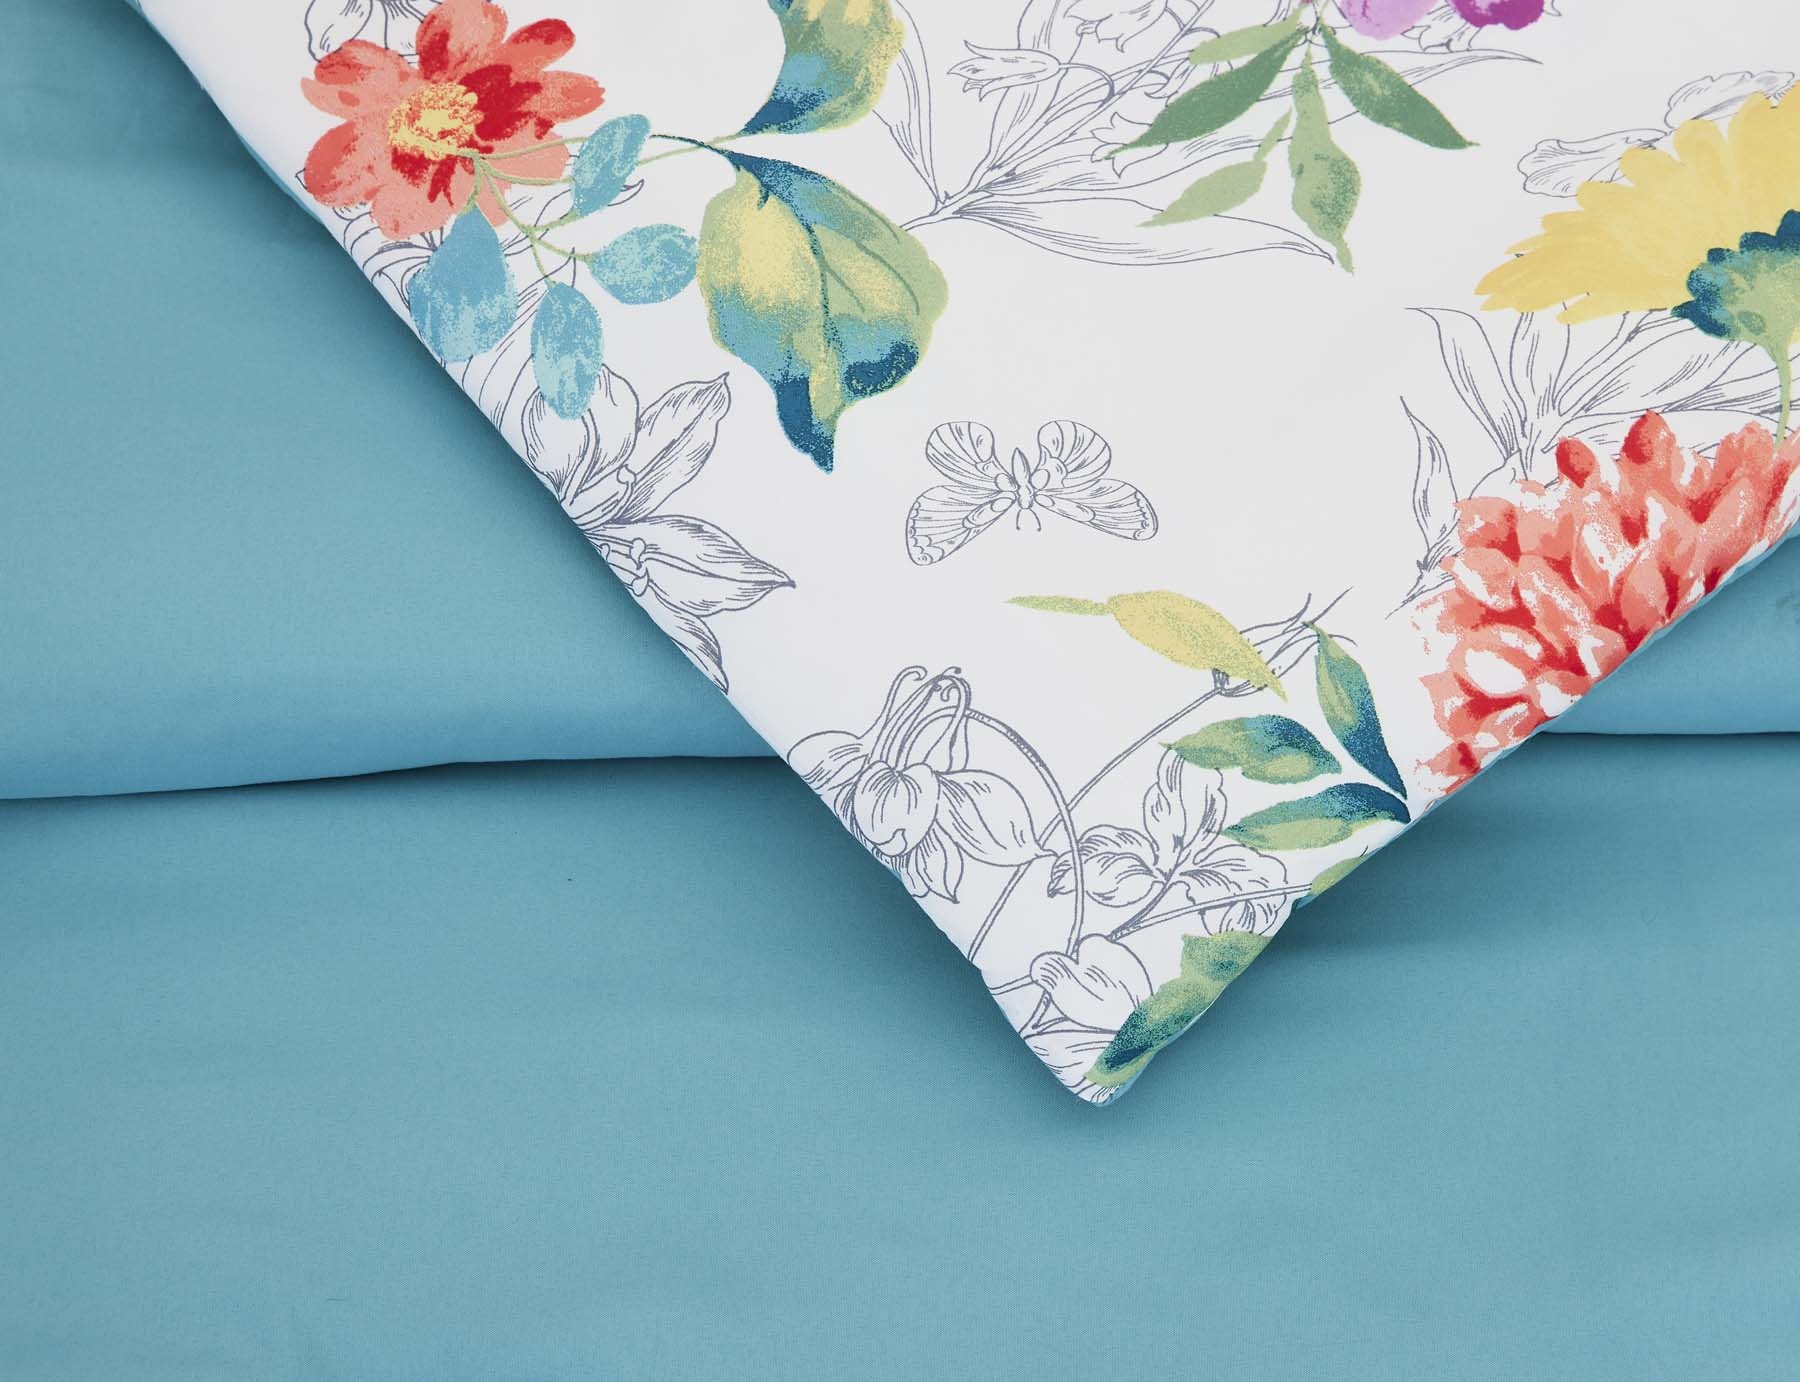 The Pioneer Woman Teal Polyester Blooming Bouquet 4-Piece Full/Queen Comforter Set - image 5 of 9